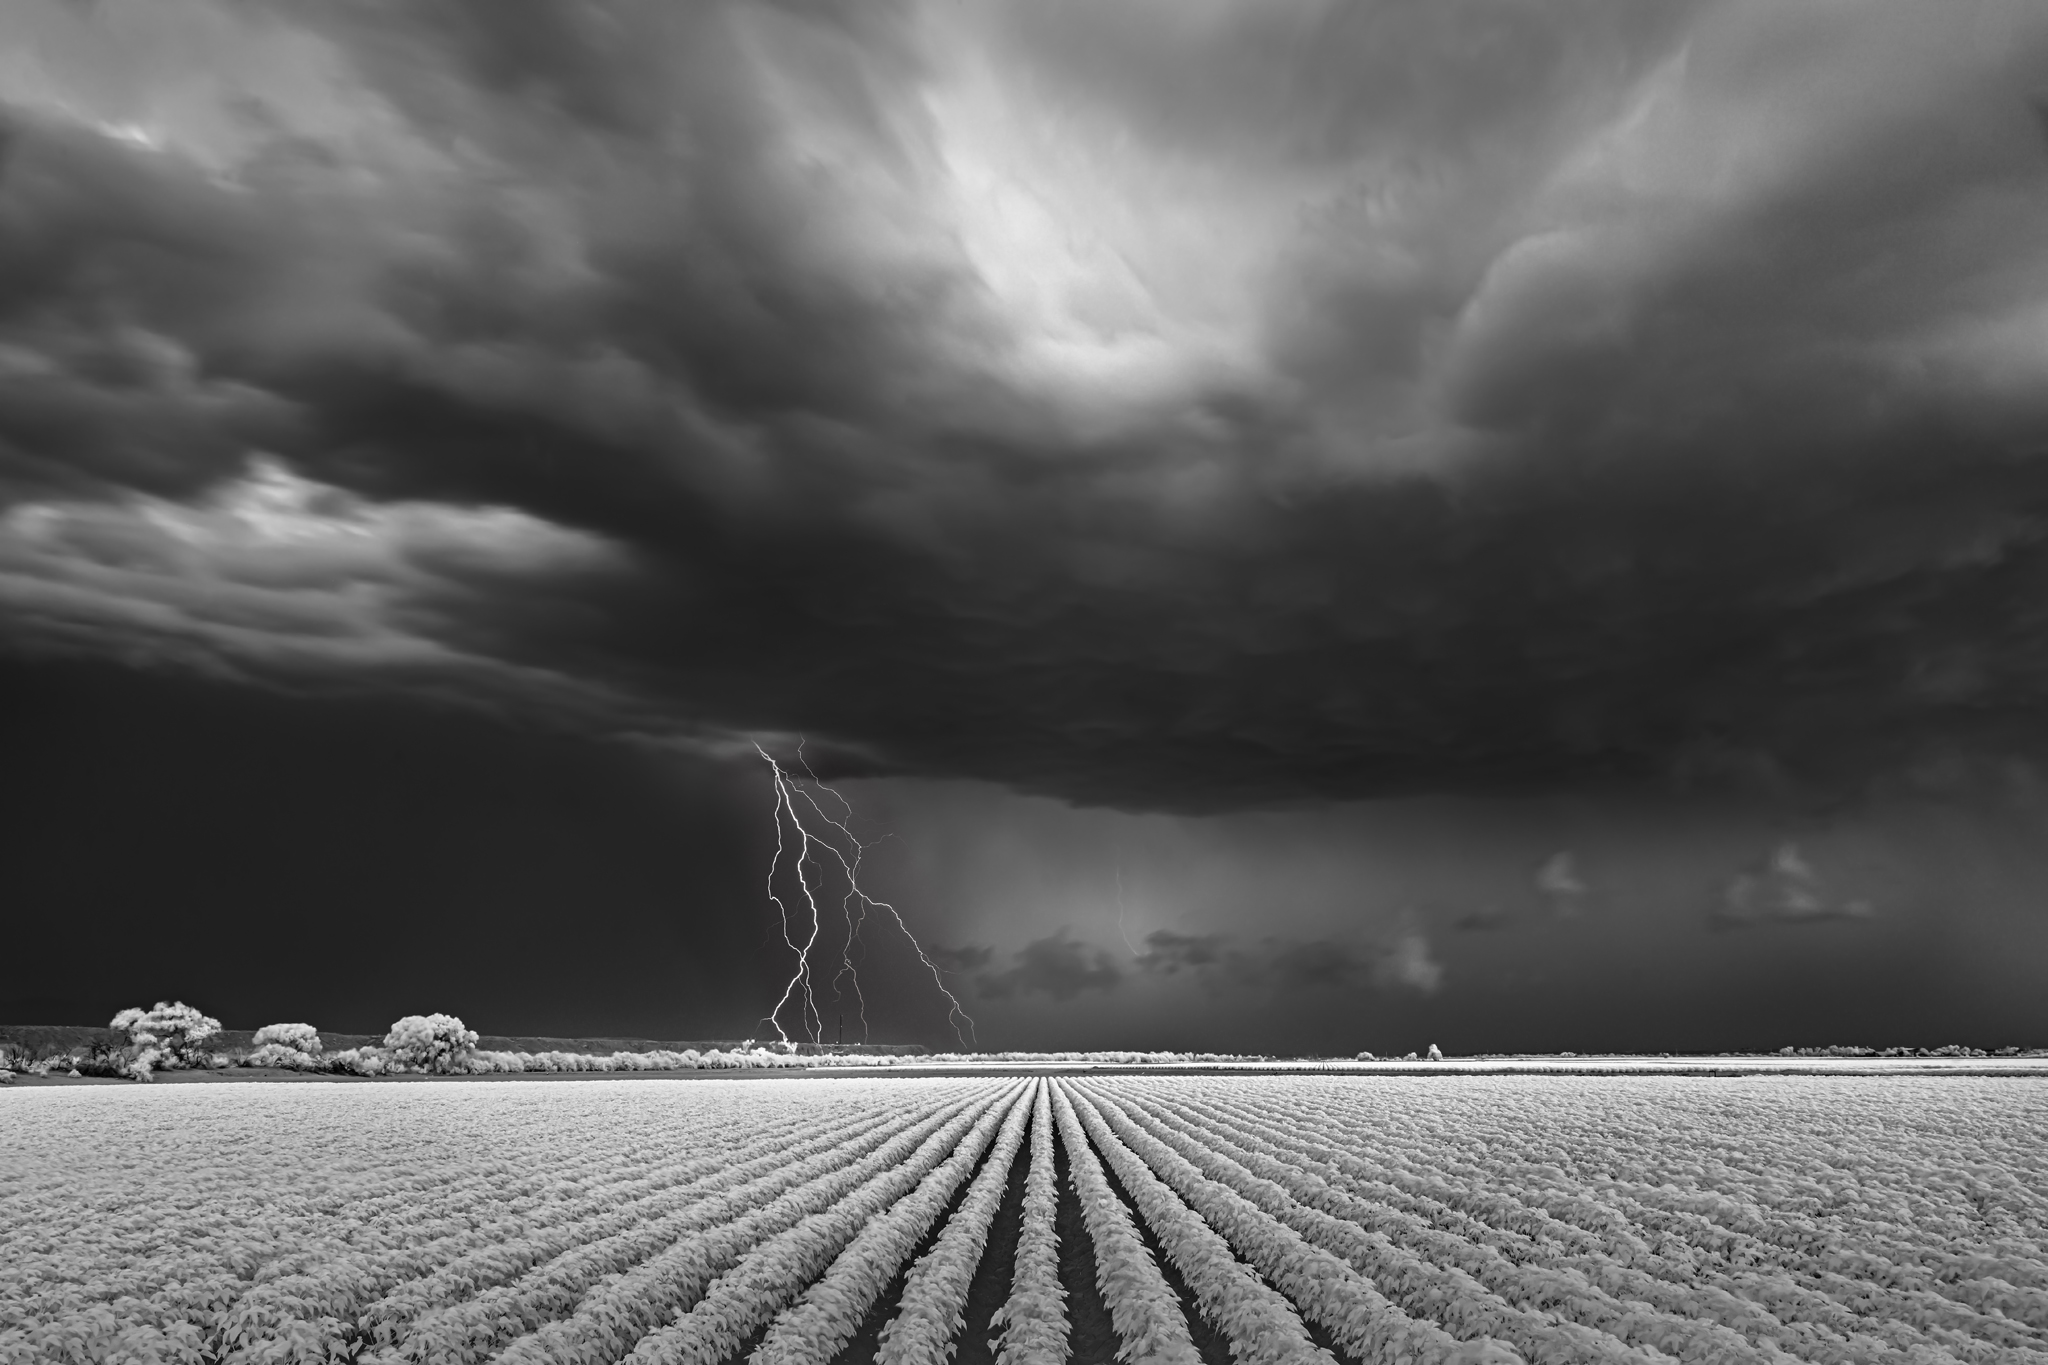 Lightning Over Cotton Field Mitch Dobrowner